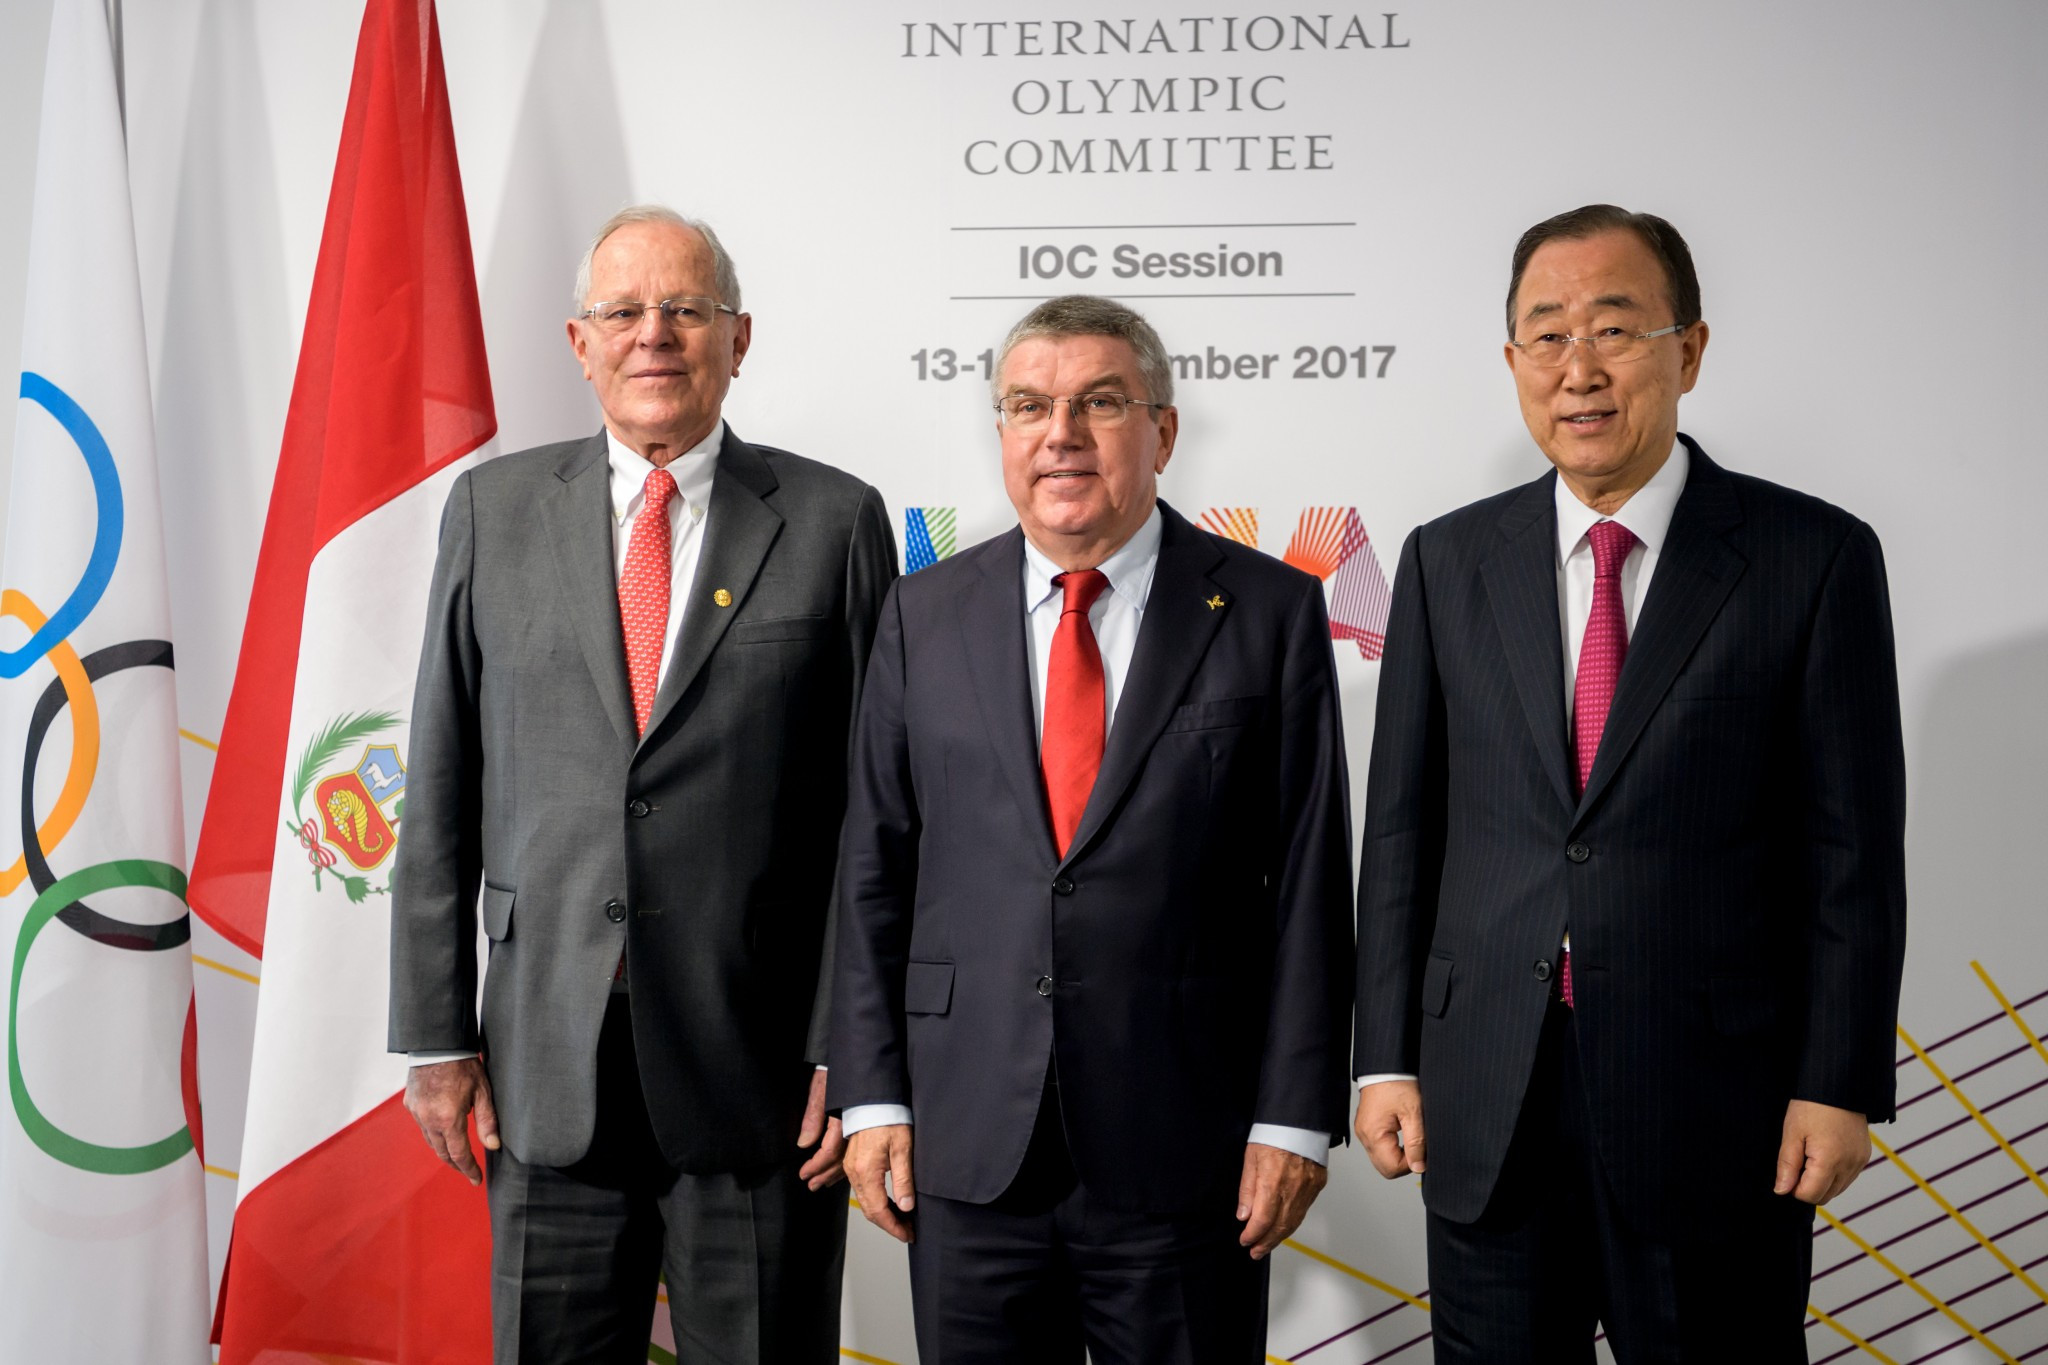 Peru President Pedro Pablo Kuczynski, left, joined the IOC Session in the morning ©Getty Images